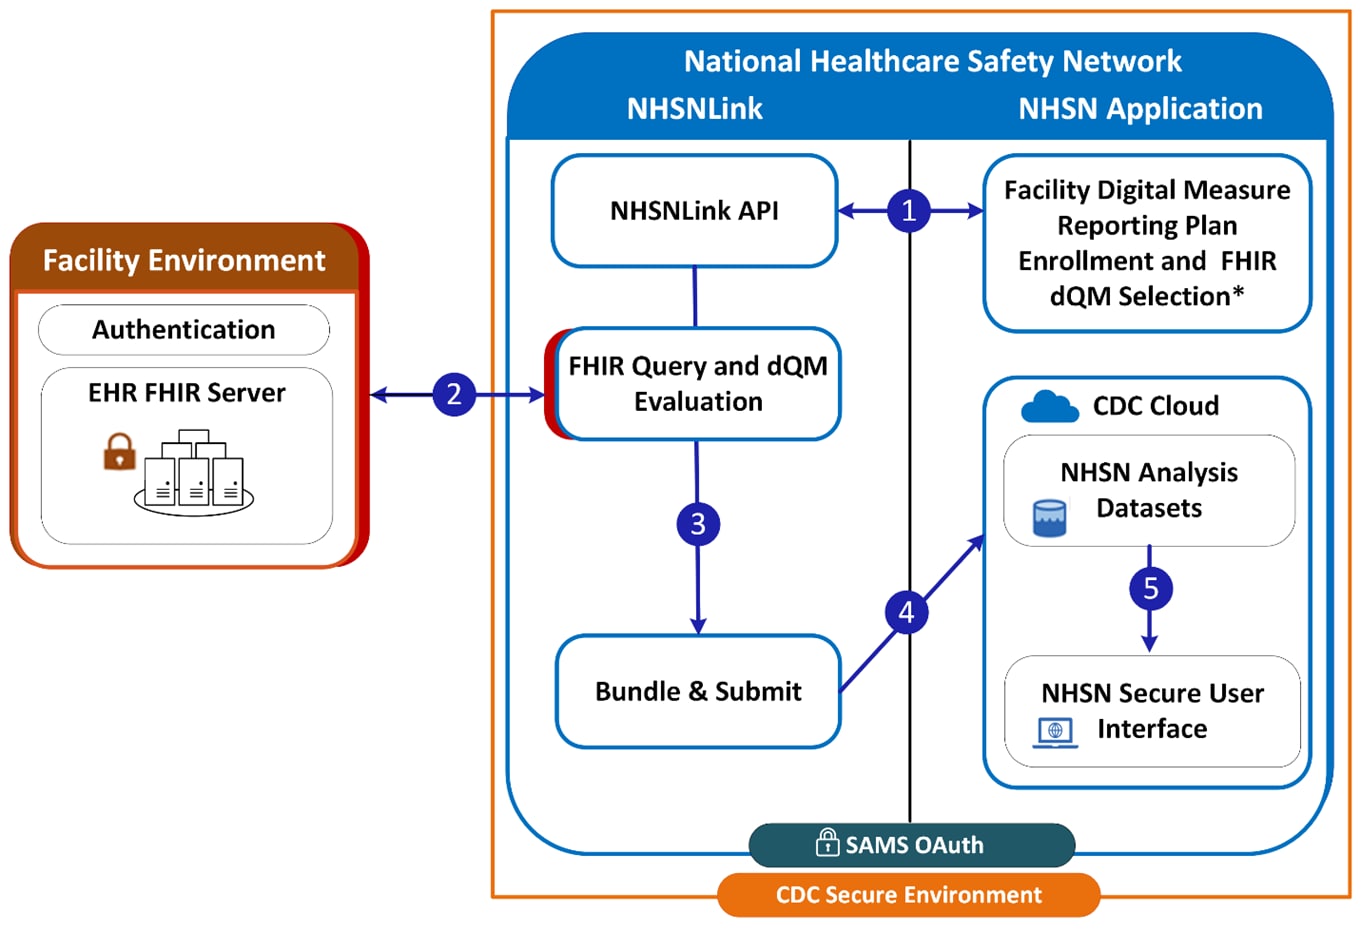 How NHSNLink interacts with NHSN and facility environment.